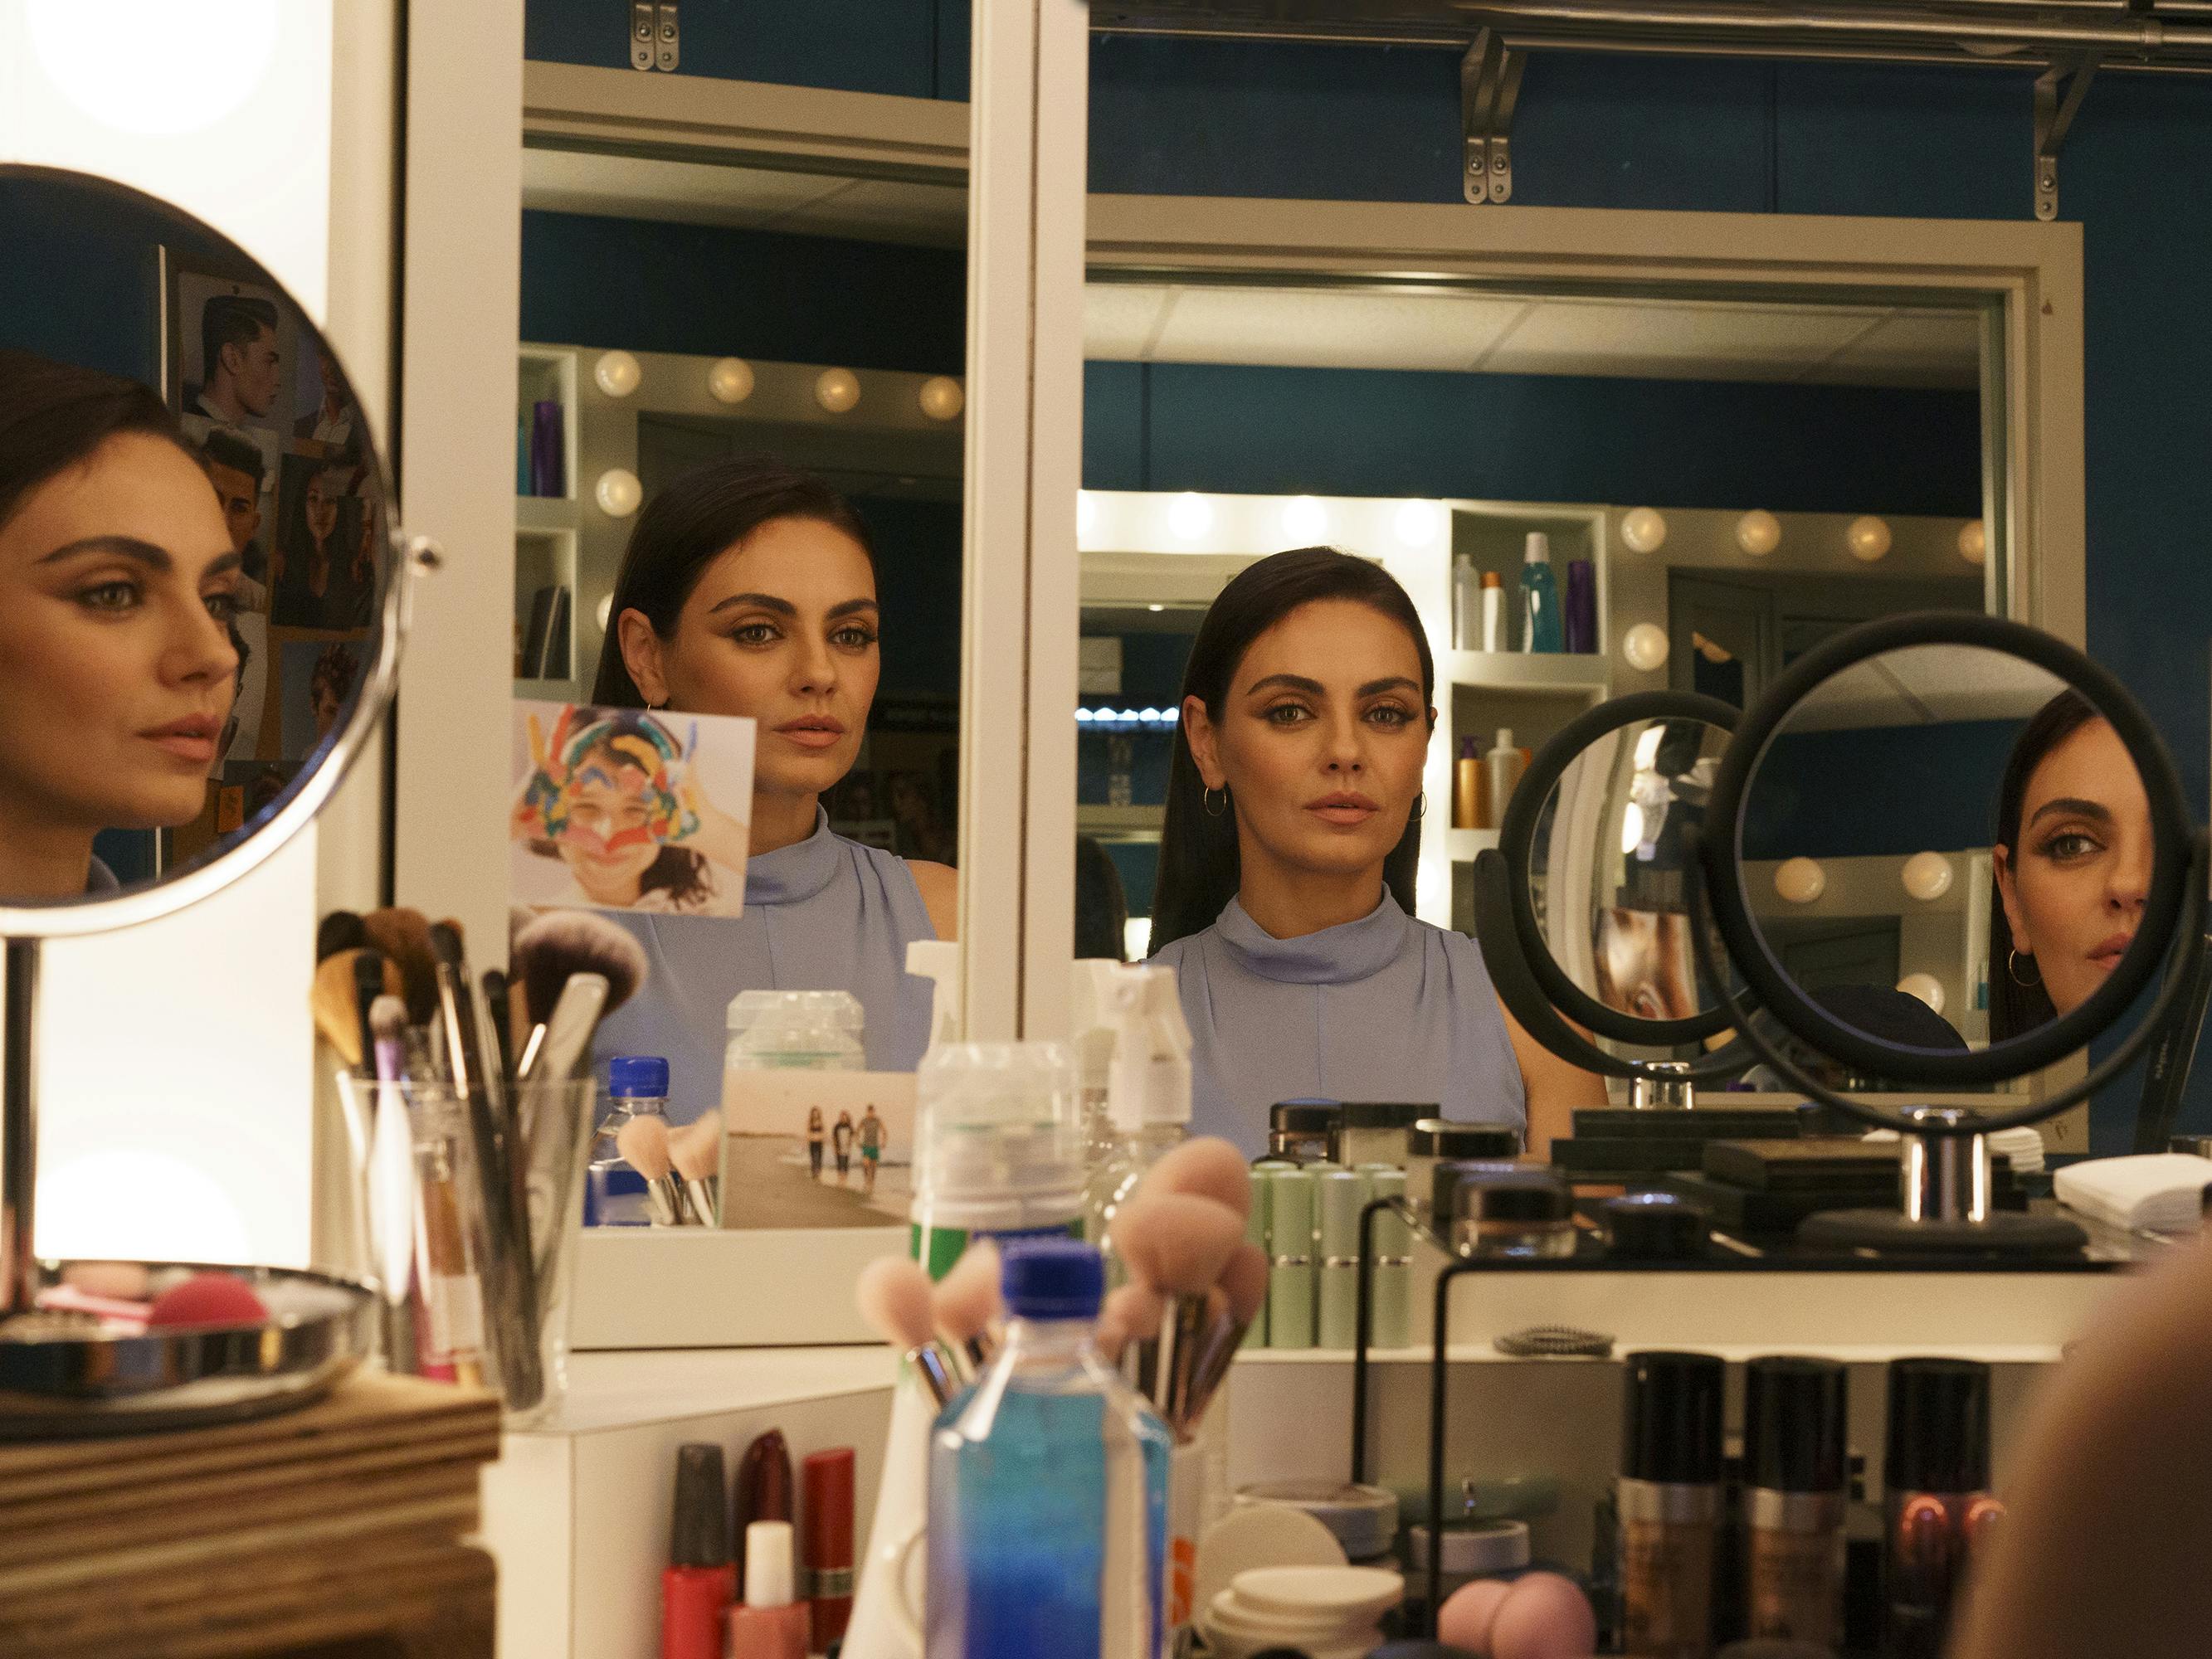 Mila Kunis wears a blue top and looks at many reflections of herself in many different mirrors at a makeup vanity. This meta-cinematic image ran as a digital cover for Queue.  